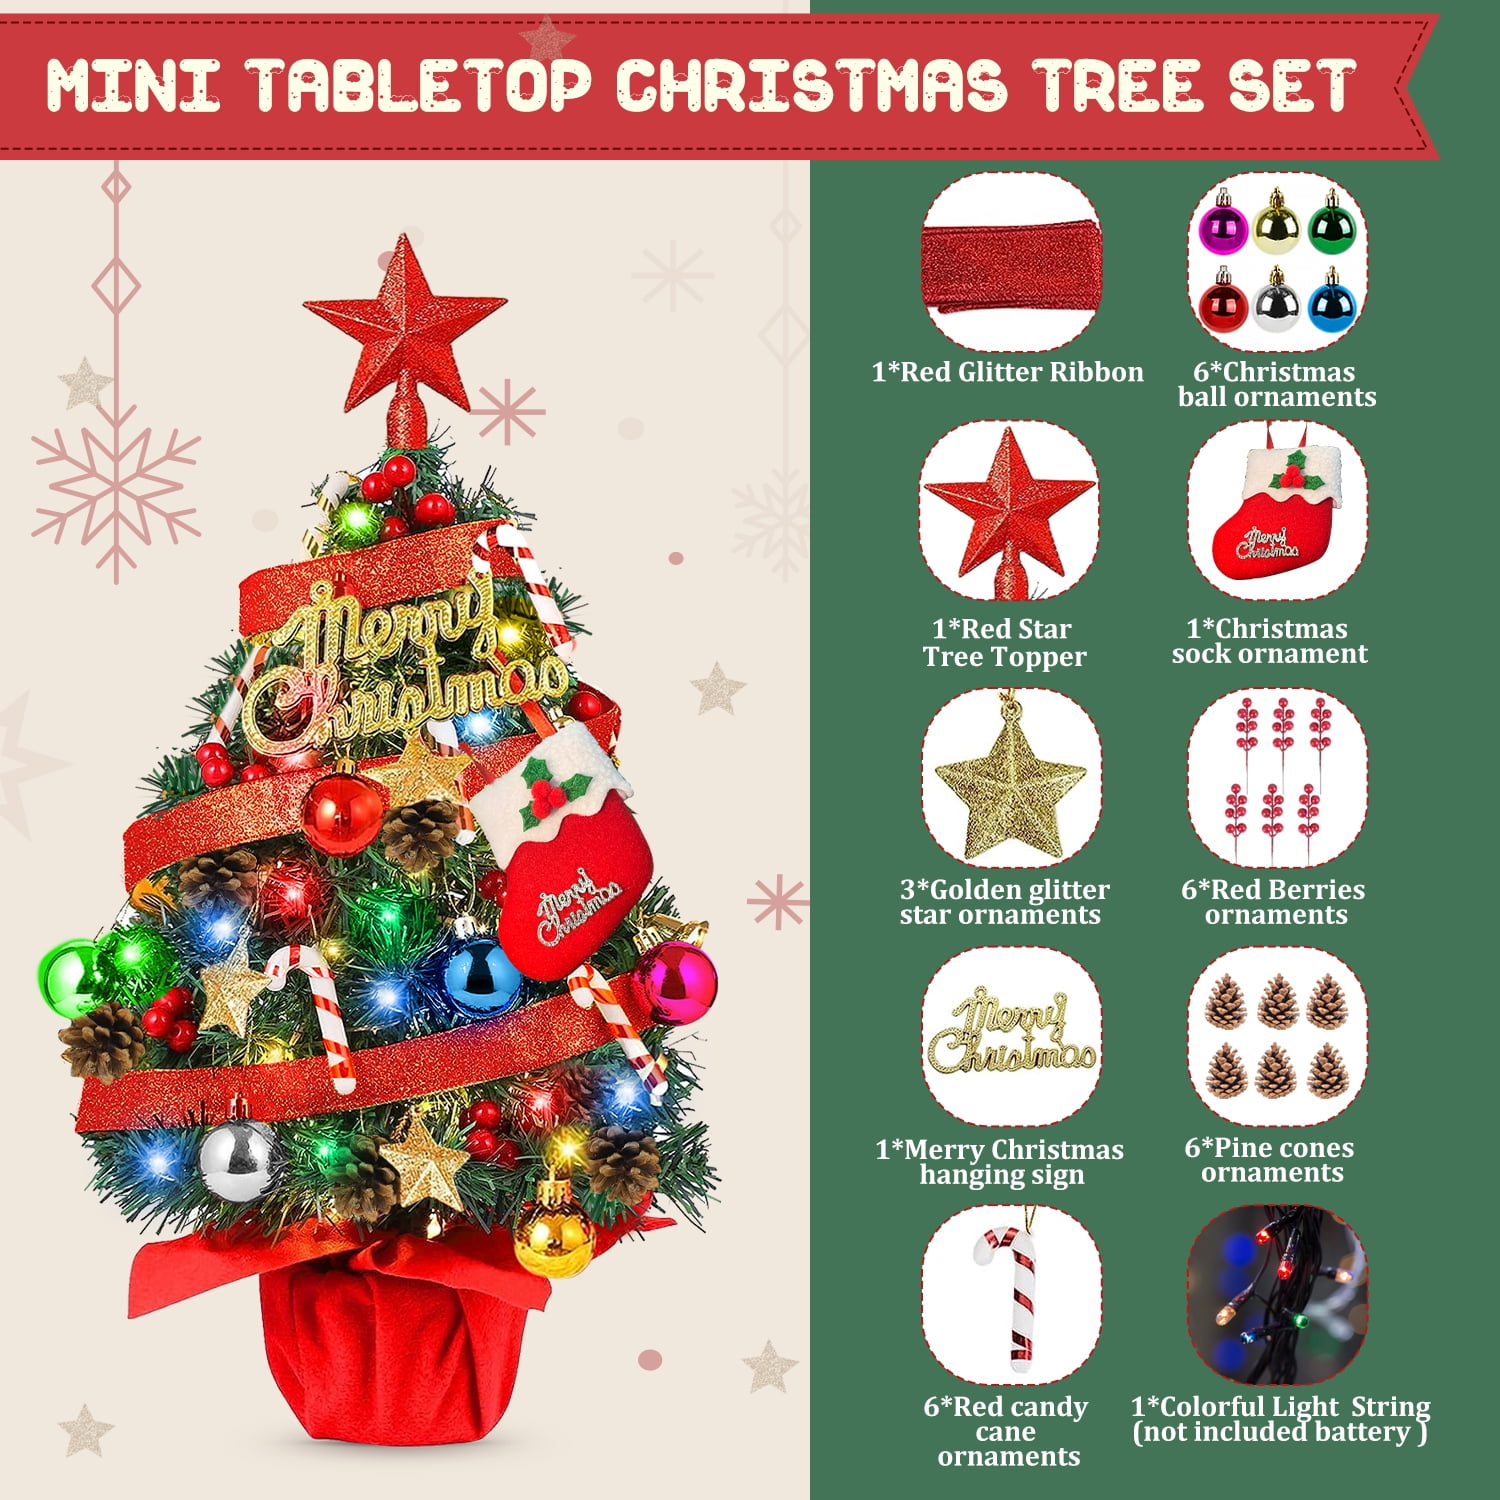 SDJMa 18 Tabletop Mini Christmas Tree Set with LED Light, Star  Treetop,Ornaments Balls,Bells and Pine Cones,Best DIY Christmas Decorations  Red